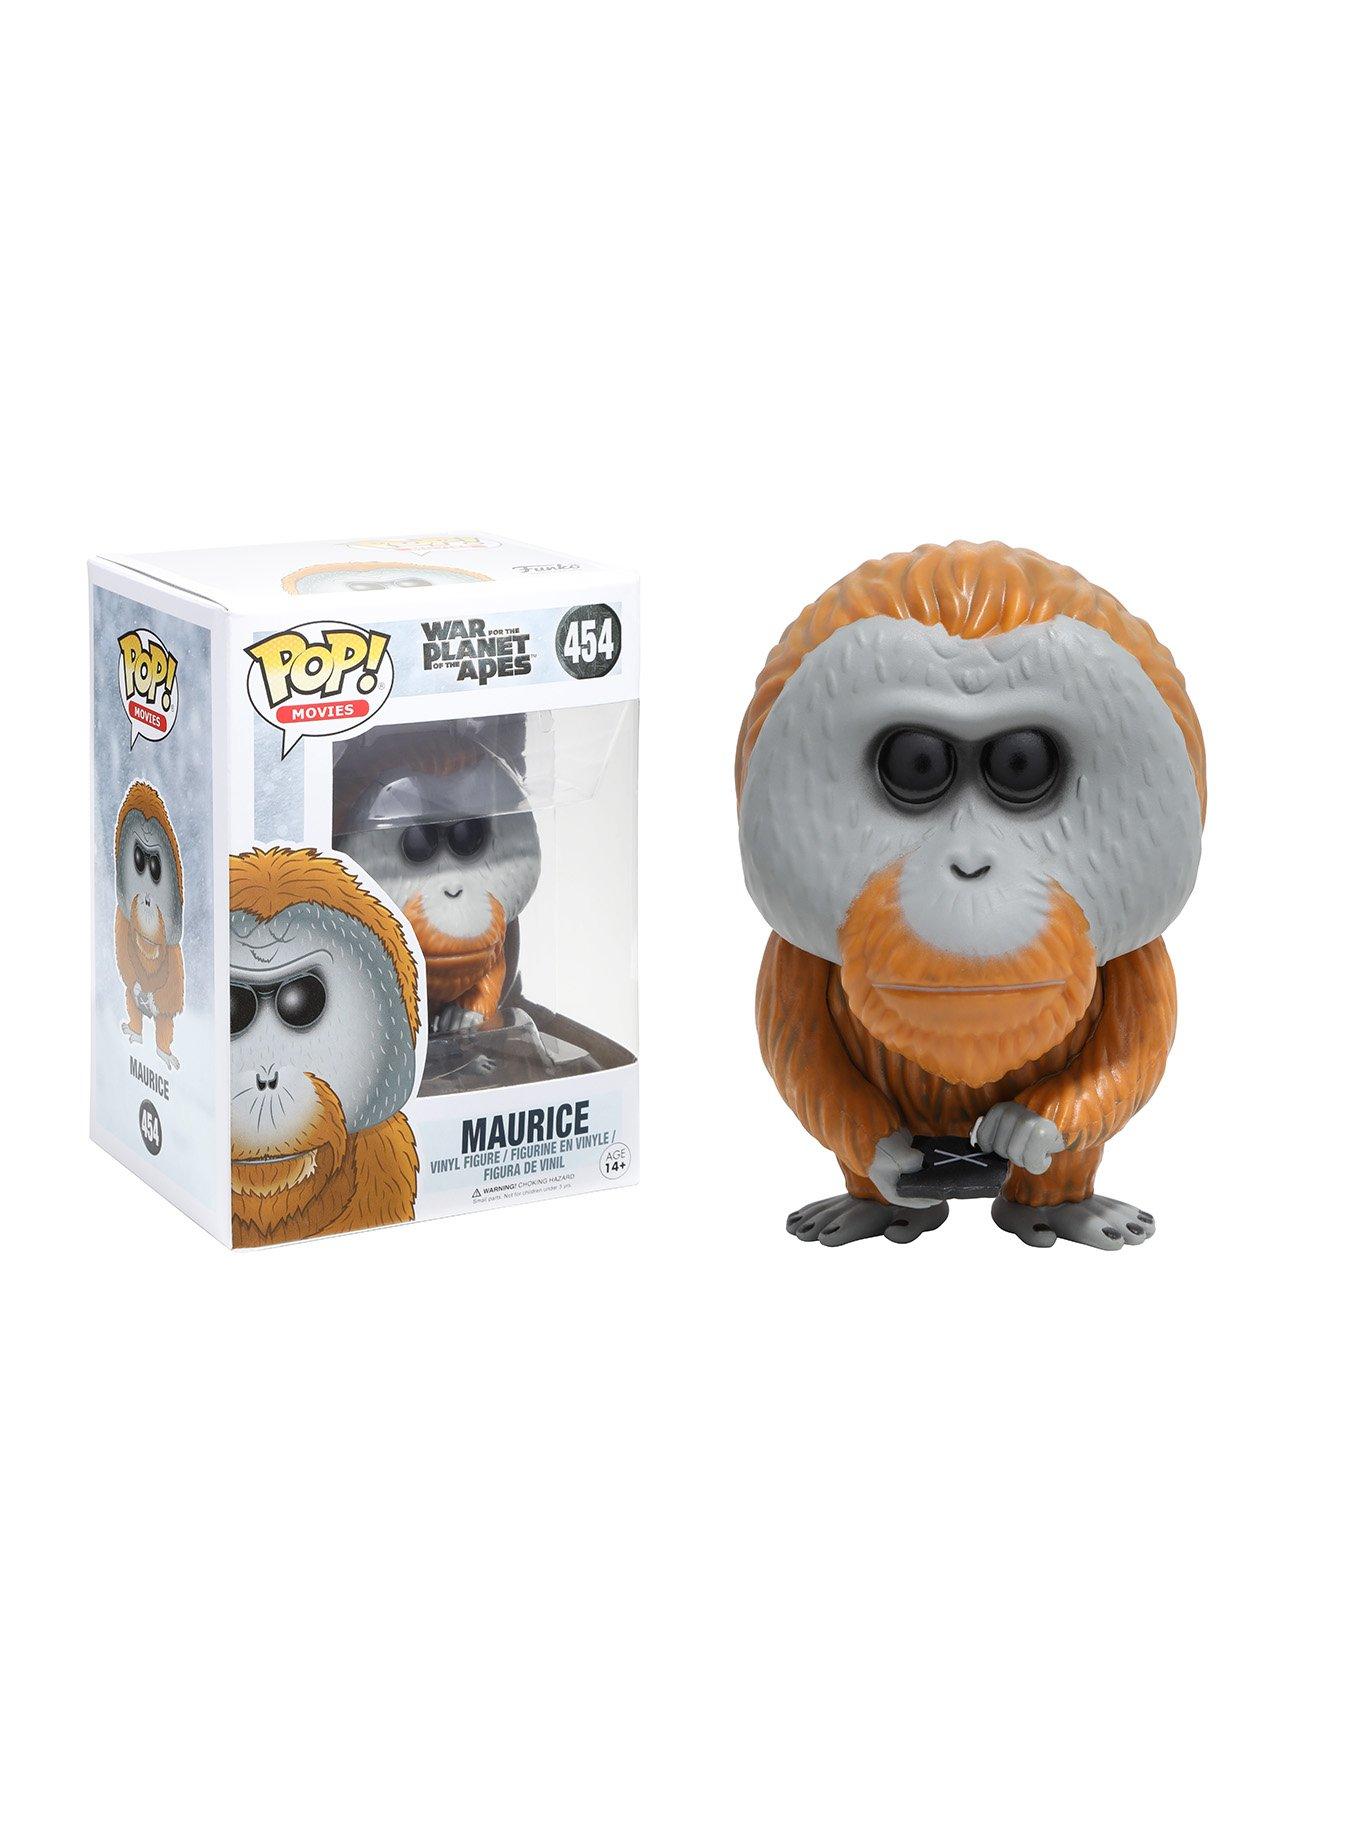 planet of the apes maurice 2001